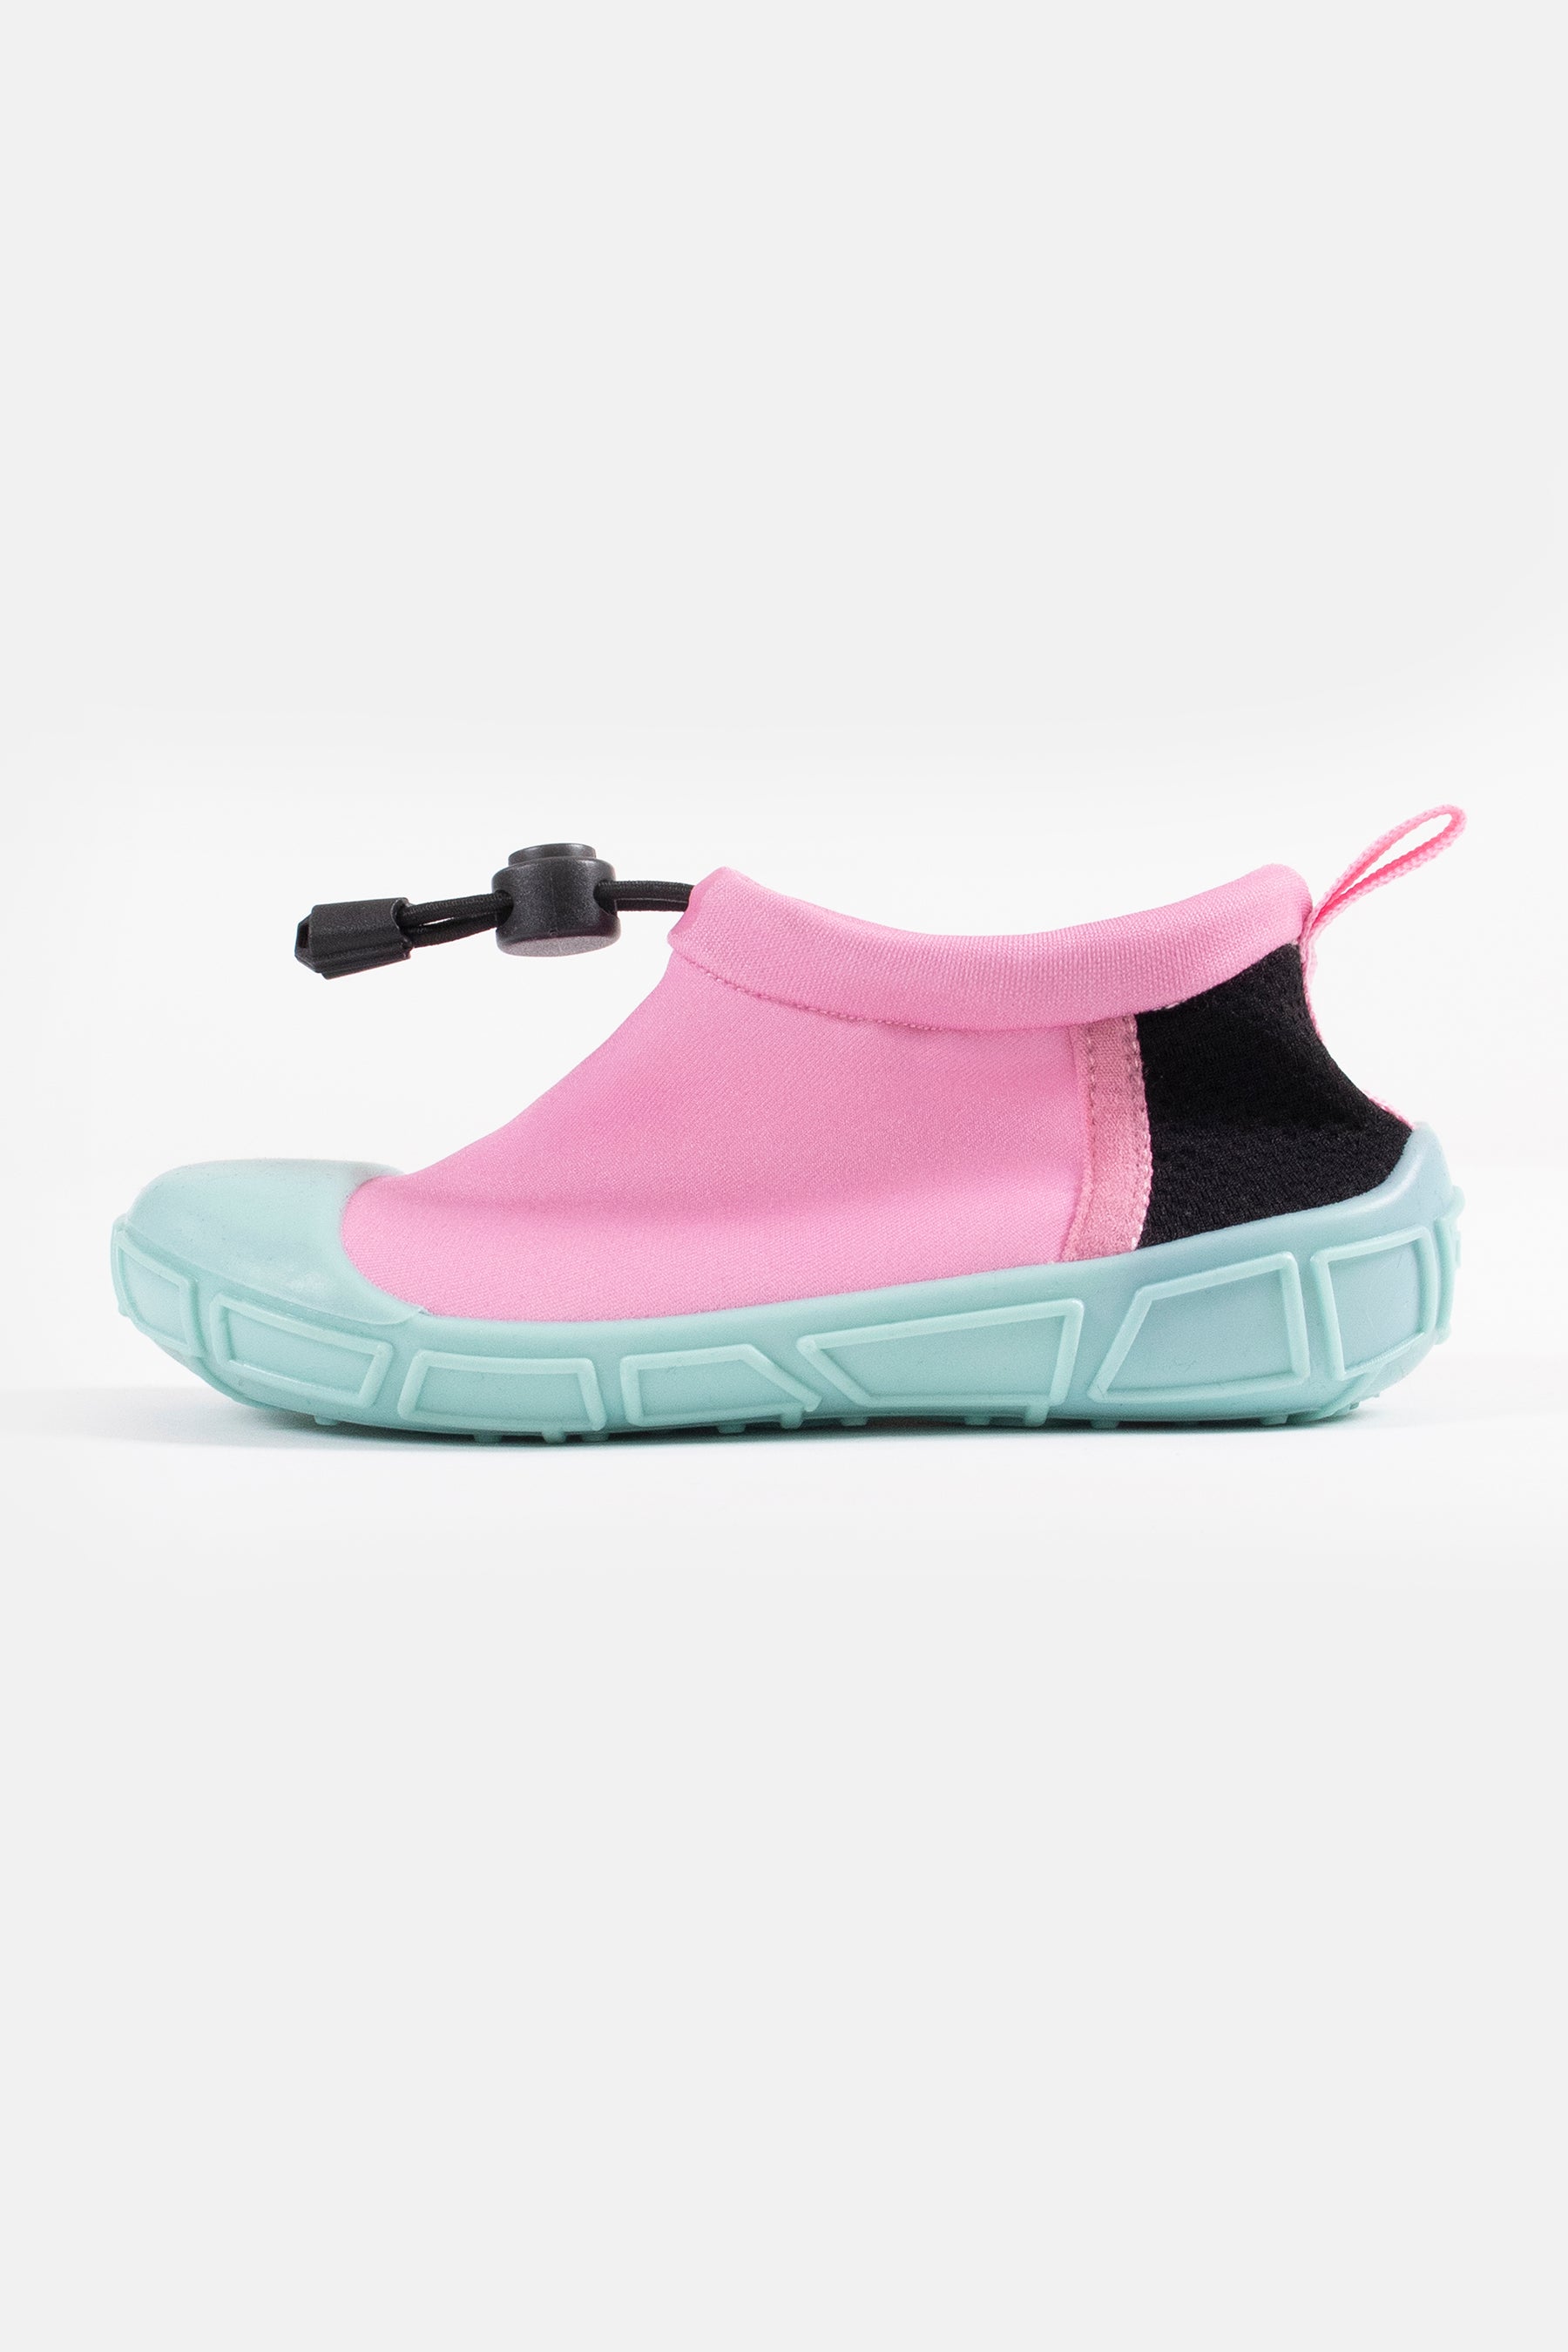 toggle aqua/water shoes in pink